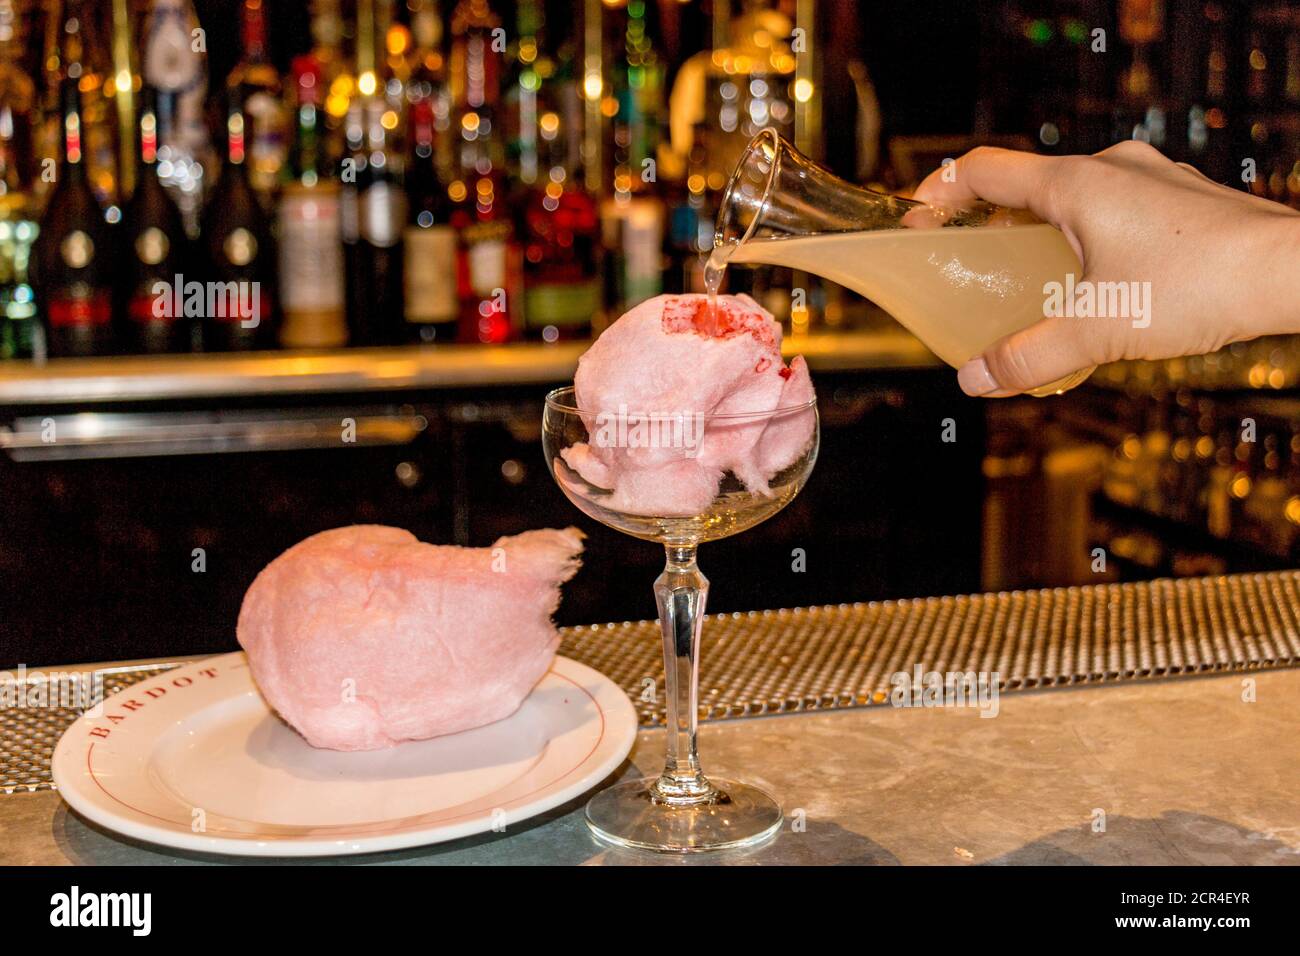 Demonstration of how to make a Pink Cashmere drink using a mix of juices and vodka poured over cotton candy. The liquids melt the cotton candy, creating a sweet after dinner drink. Stock Photo